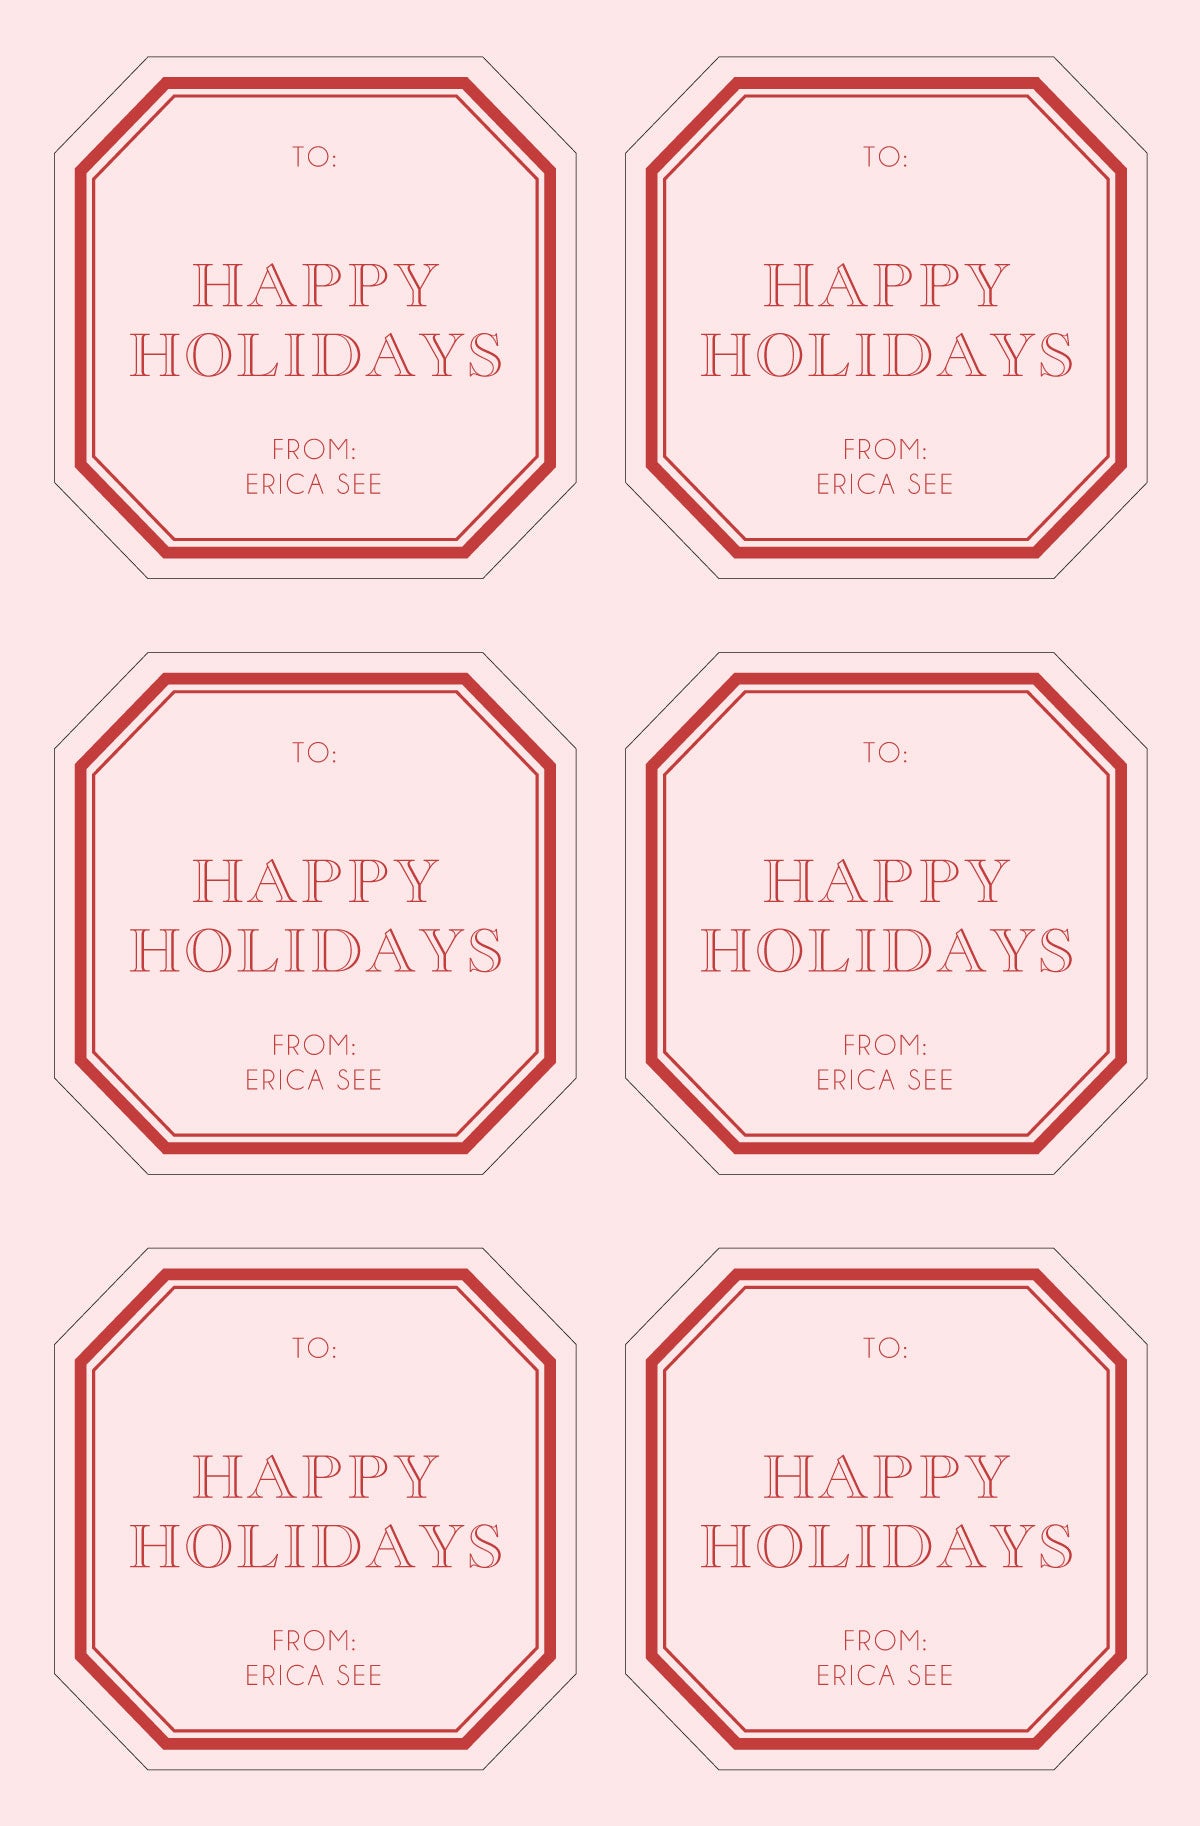 Happy Holiday Stickers